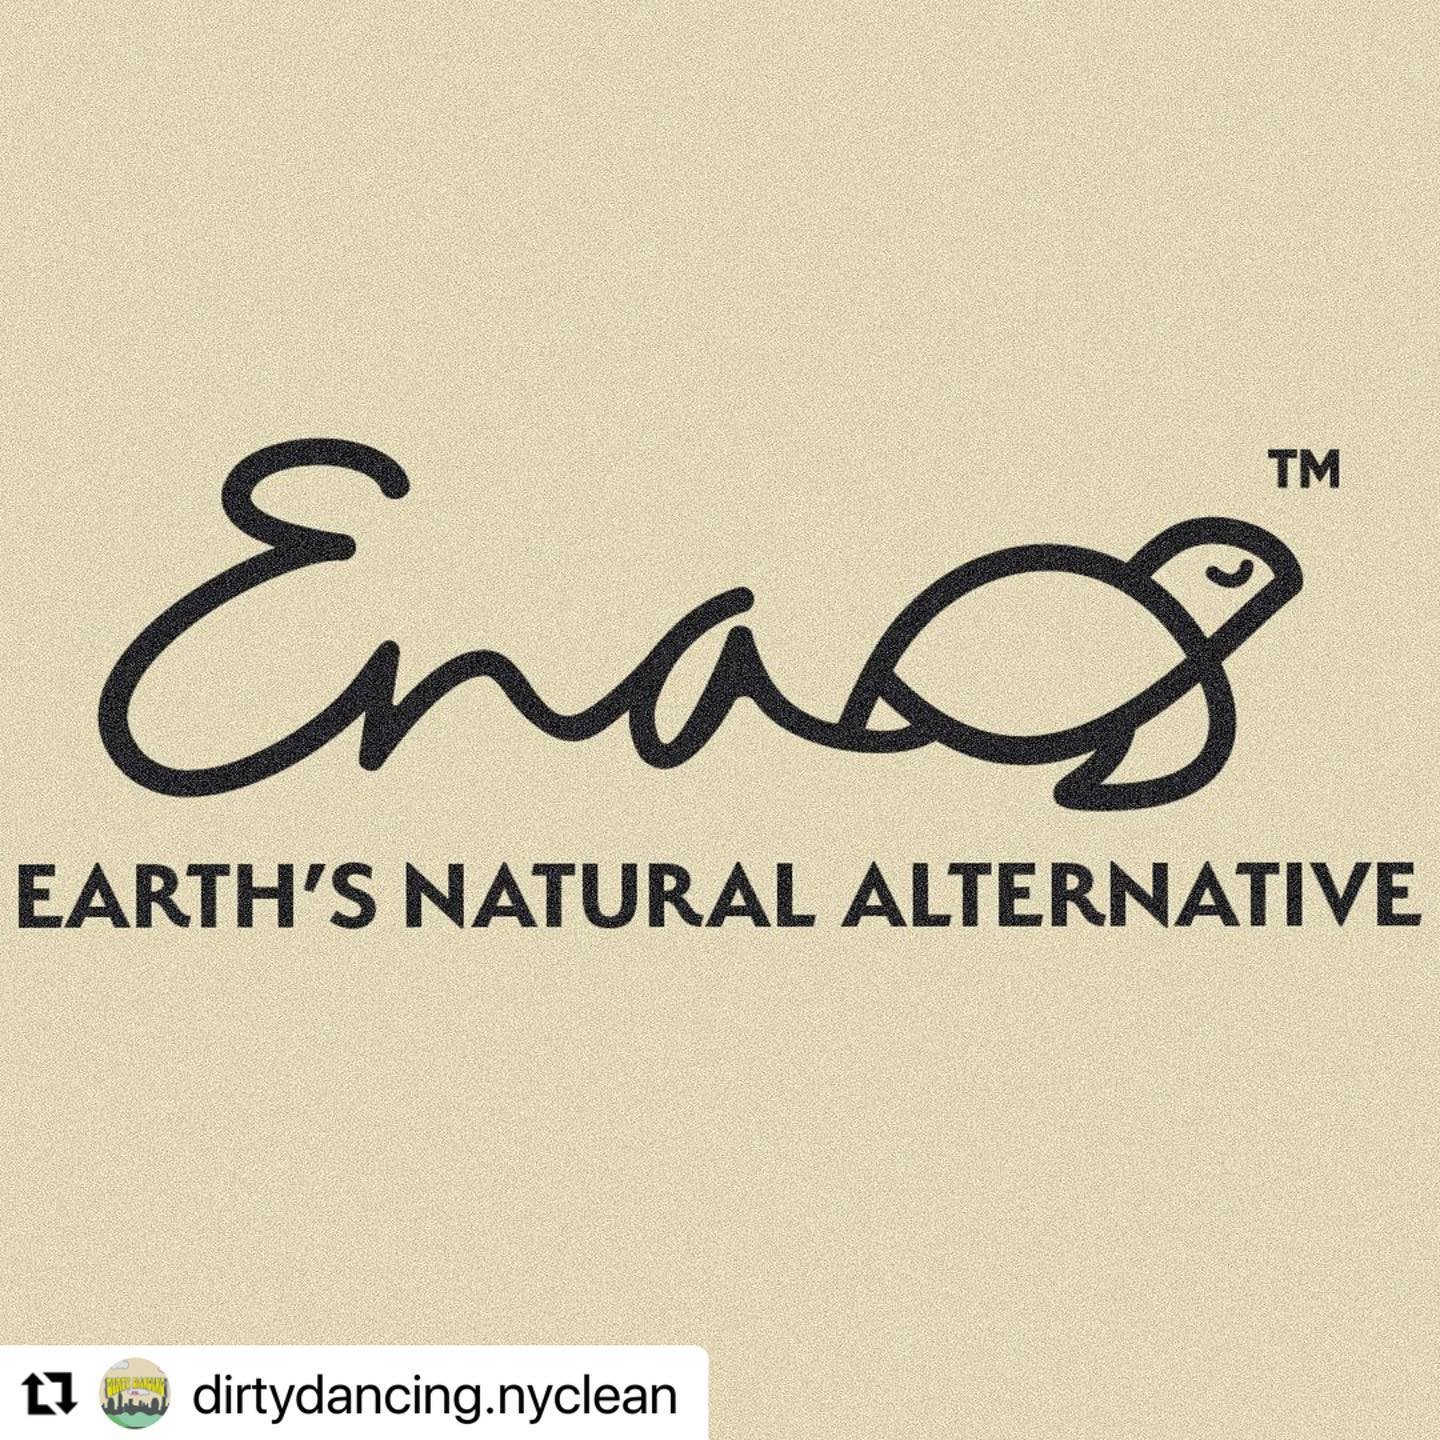 Thank you for the kind words! We are glad to have been able to contribute to your environmental movement and support the cause. Let's continue to work towards a sustainable future for our planet. Happy Earth Day!🌏❤️

#Repost @dirtydancing.nyclean
・・